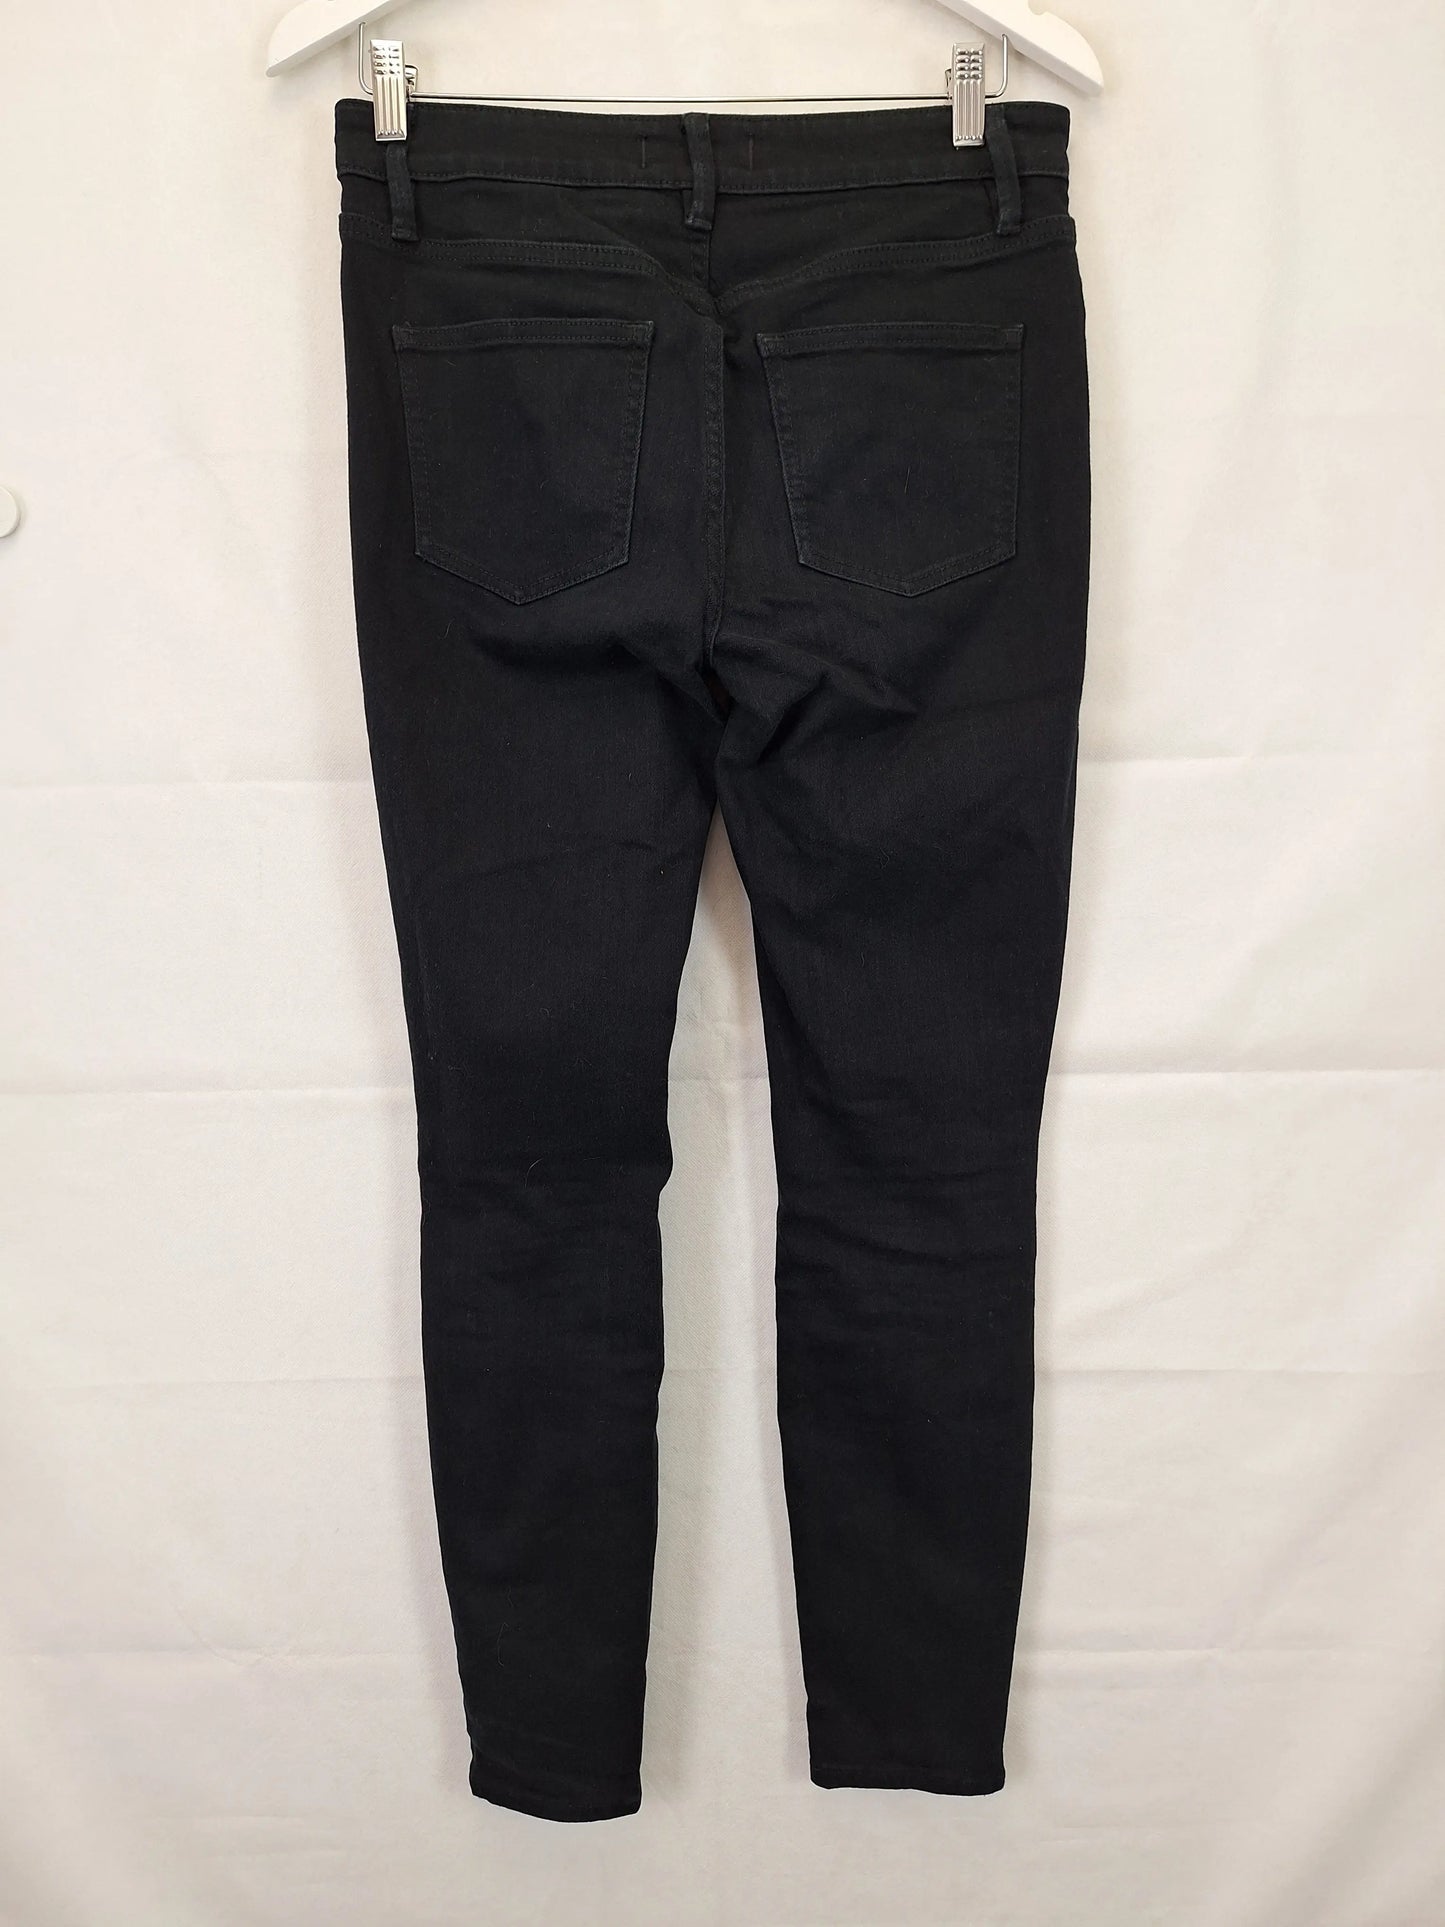 Country Road Denim Stretch Skinny Jeans Size 10 by SwapUp-Online Second Hand Store-Online Thrift Store